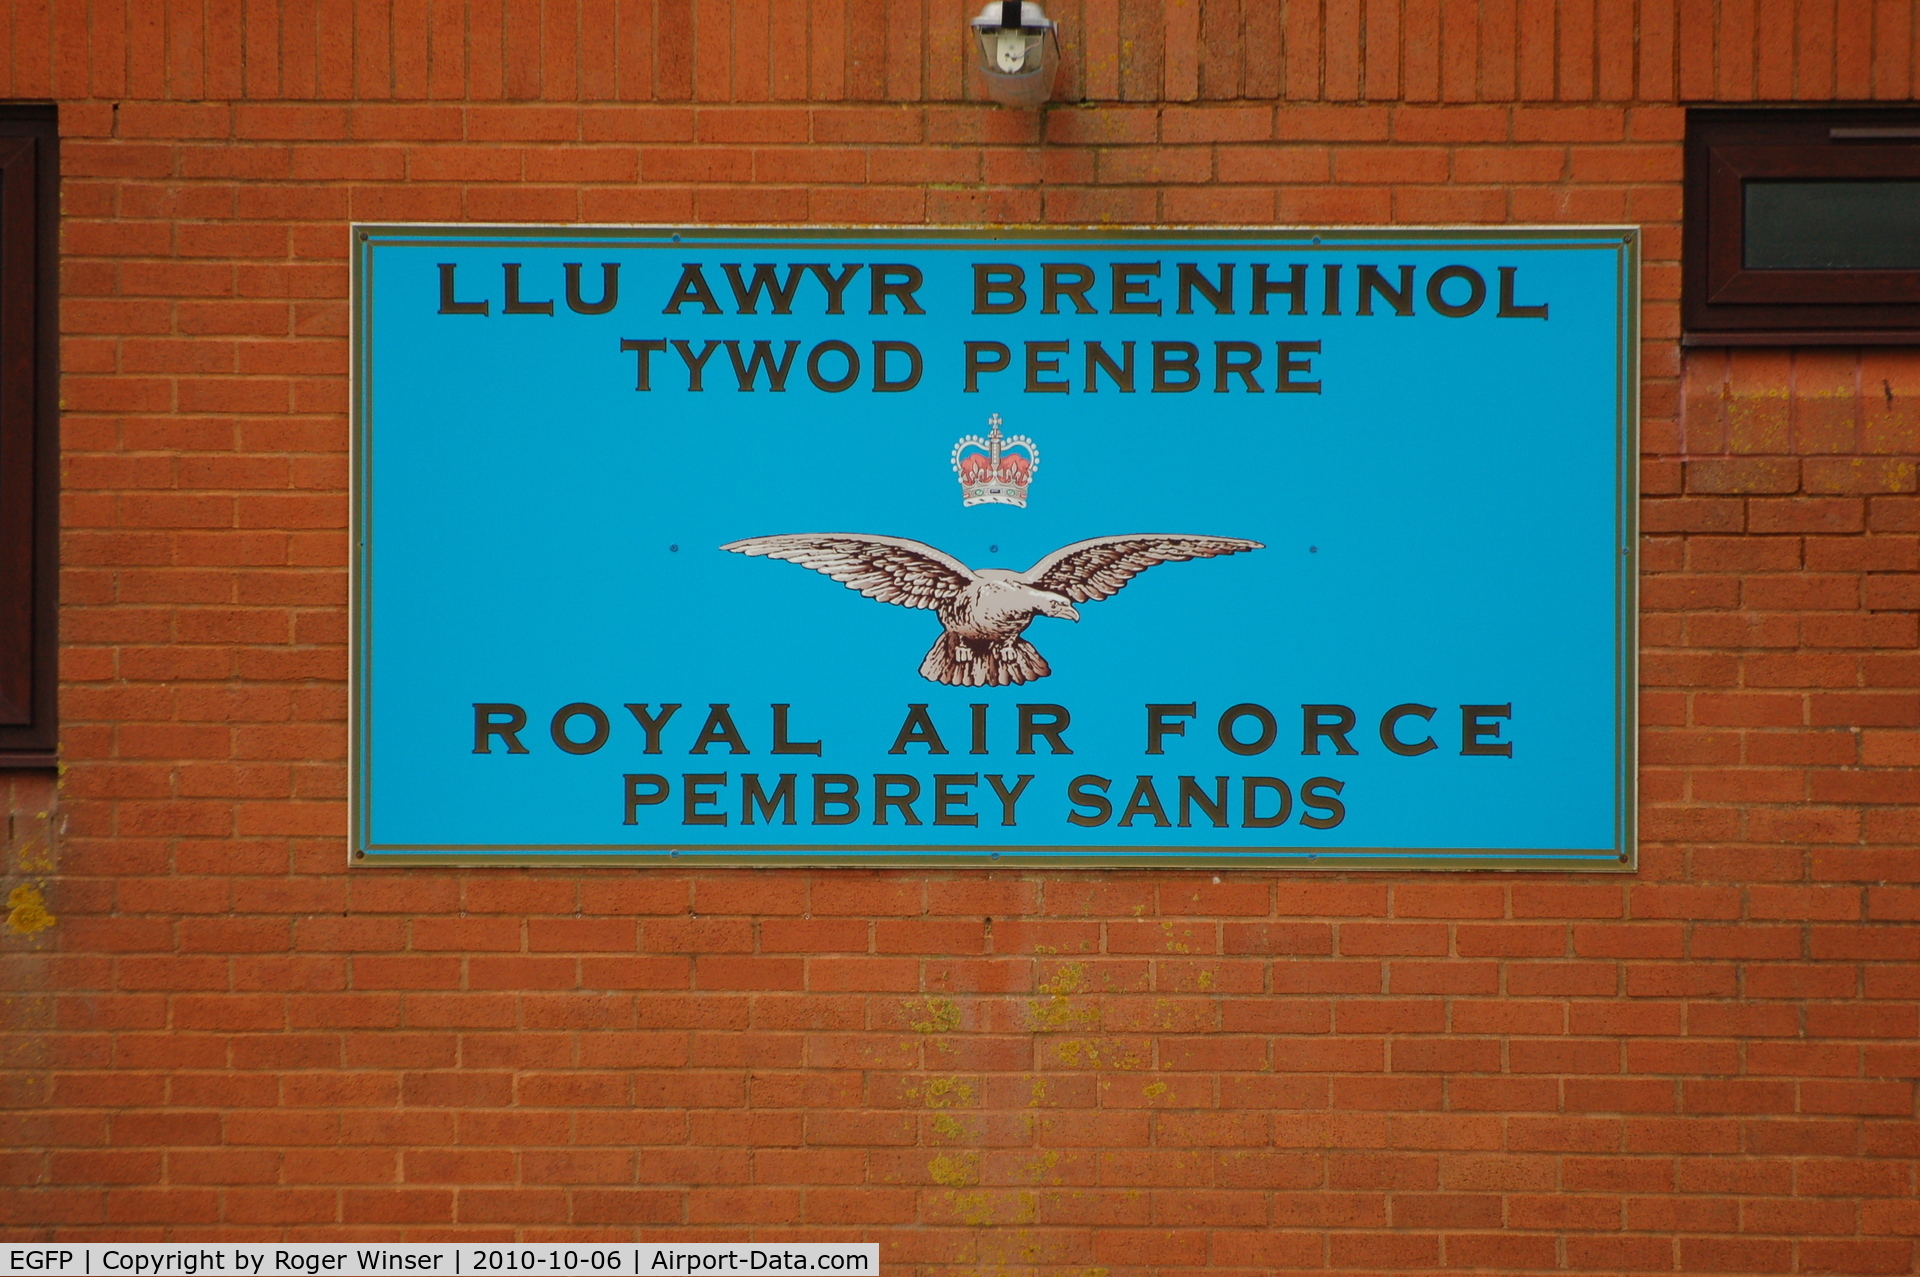 Pembrey Airport, Pembrey, Wales United Kingdom (EGFP) - Sign on the administration building situated on the former RAF Station Pembrey technical site. RAF Pembrey Sands Air Weapons Range (EGOP) has it's own landing grounds and has never been part of the former RAF Station Pembrey or Pembrey Airport.